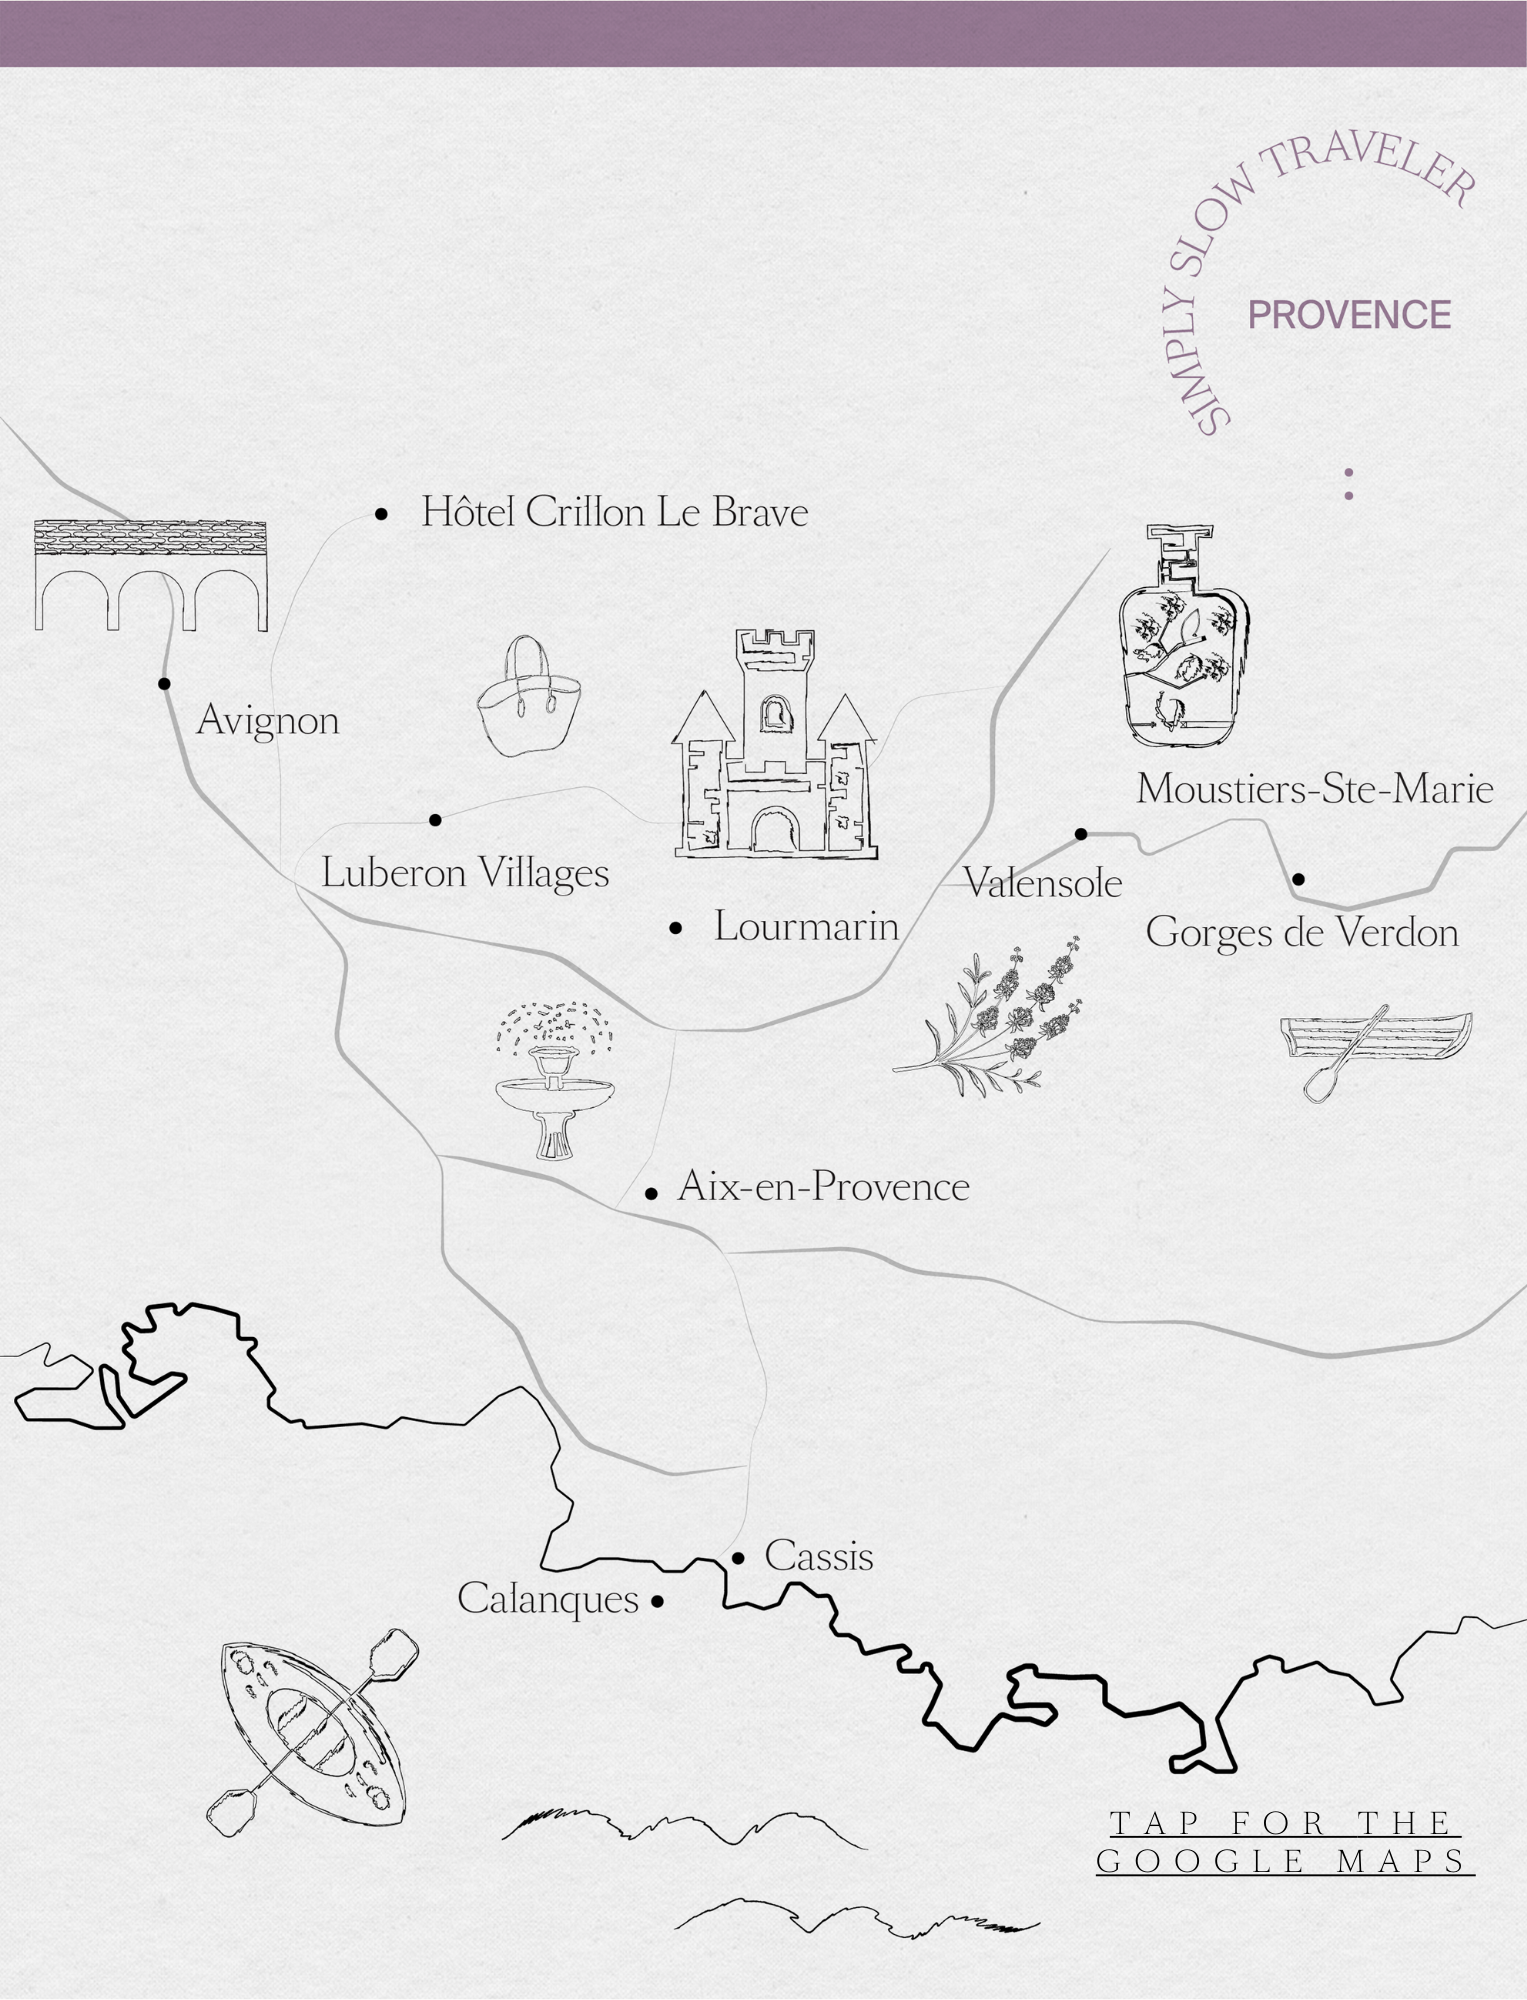 A Guide to Provence - the map to Provence, by Simply Slow Traveler